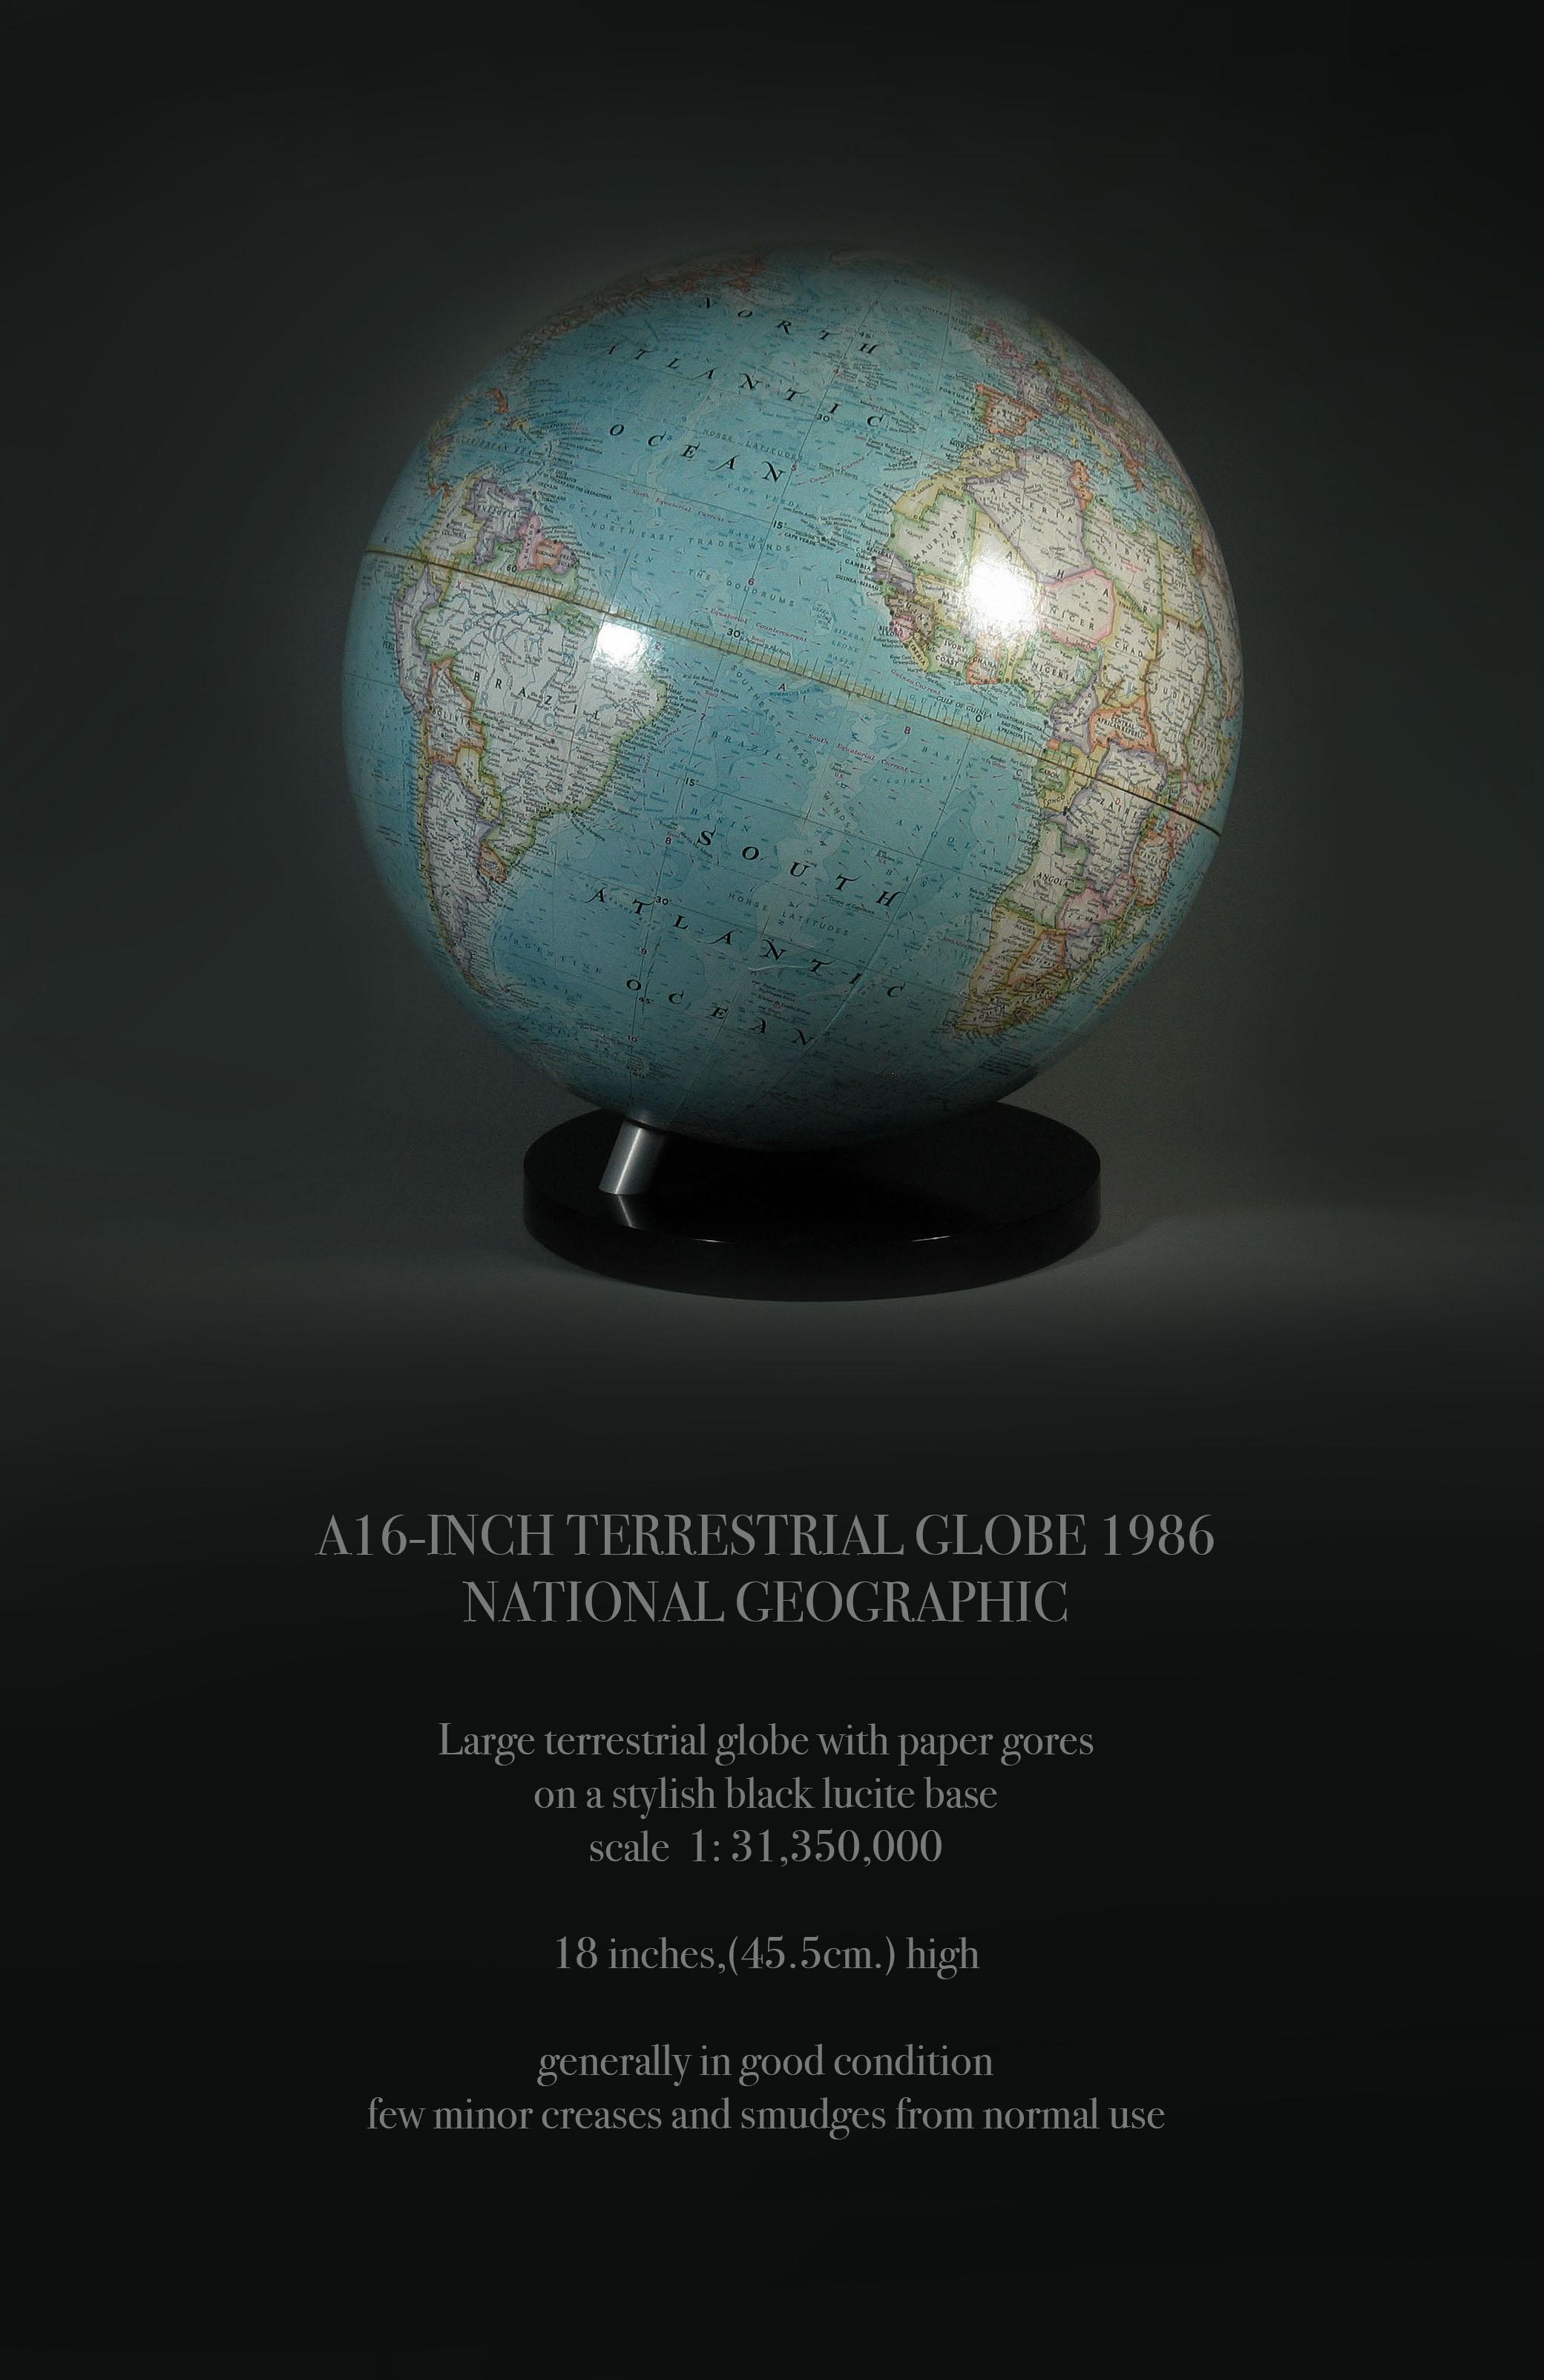 A 16-INCH TERRESTRIAL GLOBE 1986
NATIONAL GEOGRAPHIC

Large terrestrial globe with paper gores
on a stylish black lucite base
scale  1: 31,350,000

18